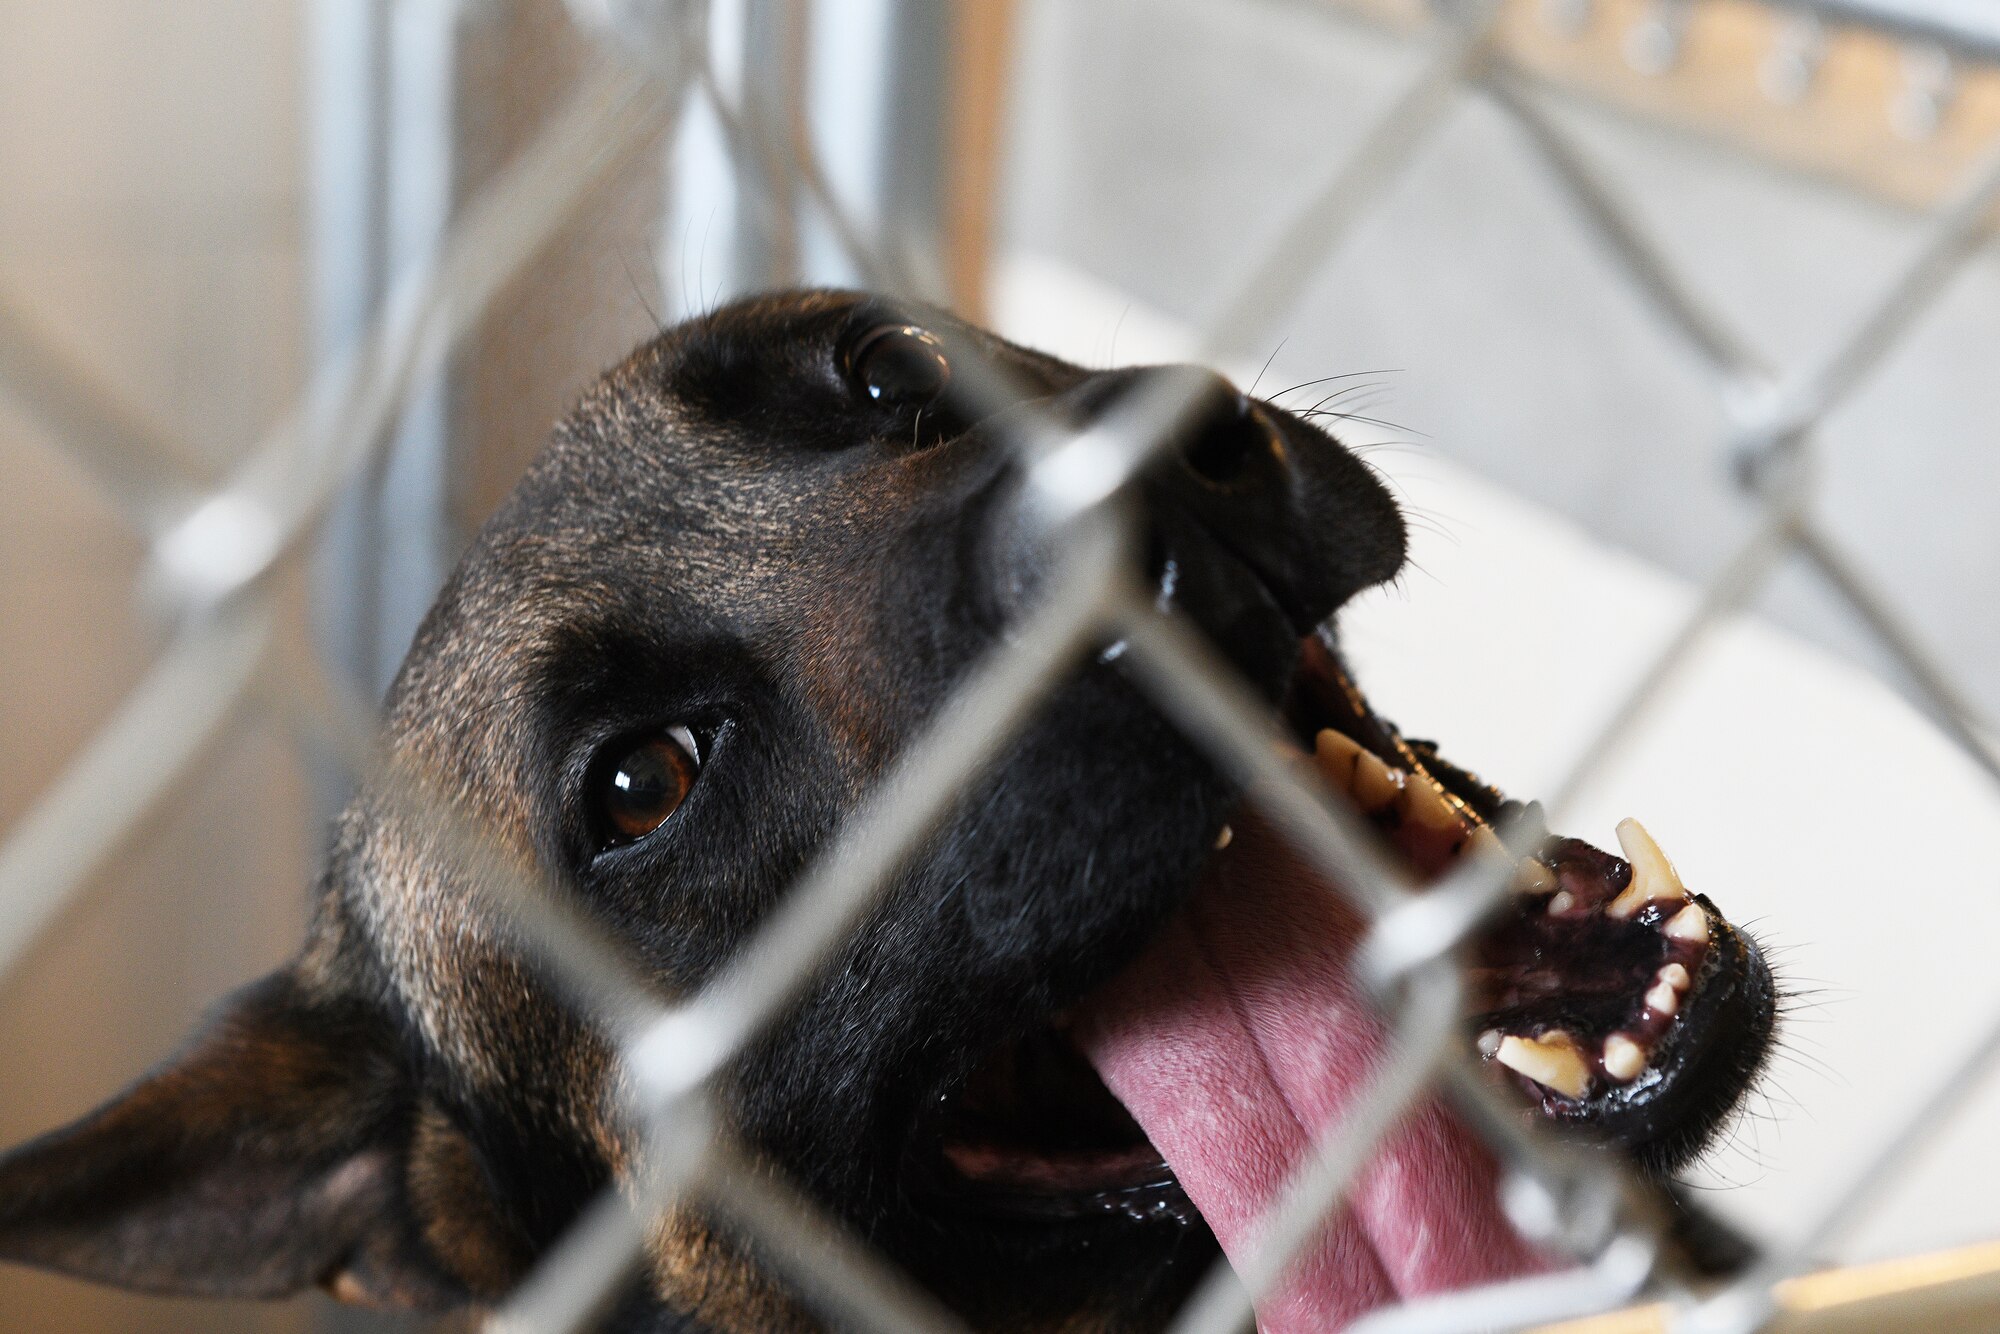 MWD Bond is pictured in his kennel Aug. 26, 2020, at Malmstrom Air Force Base, Mont.